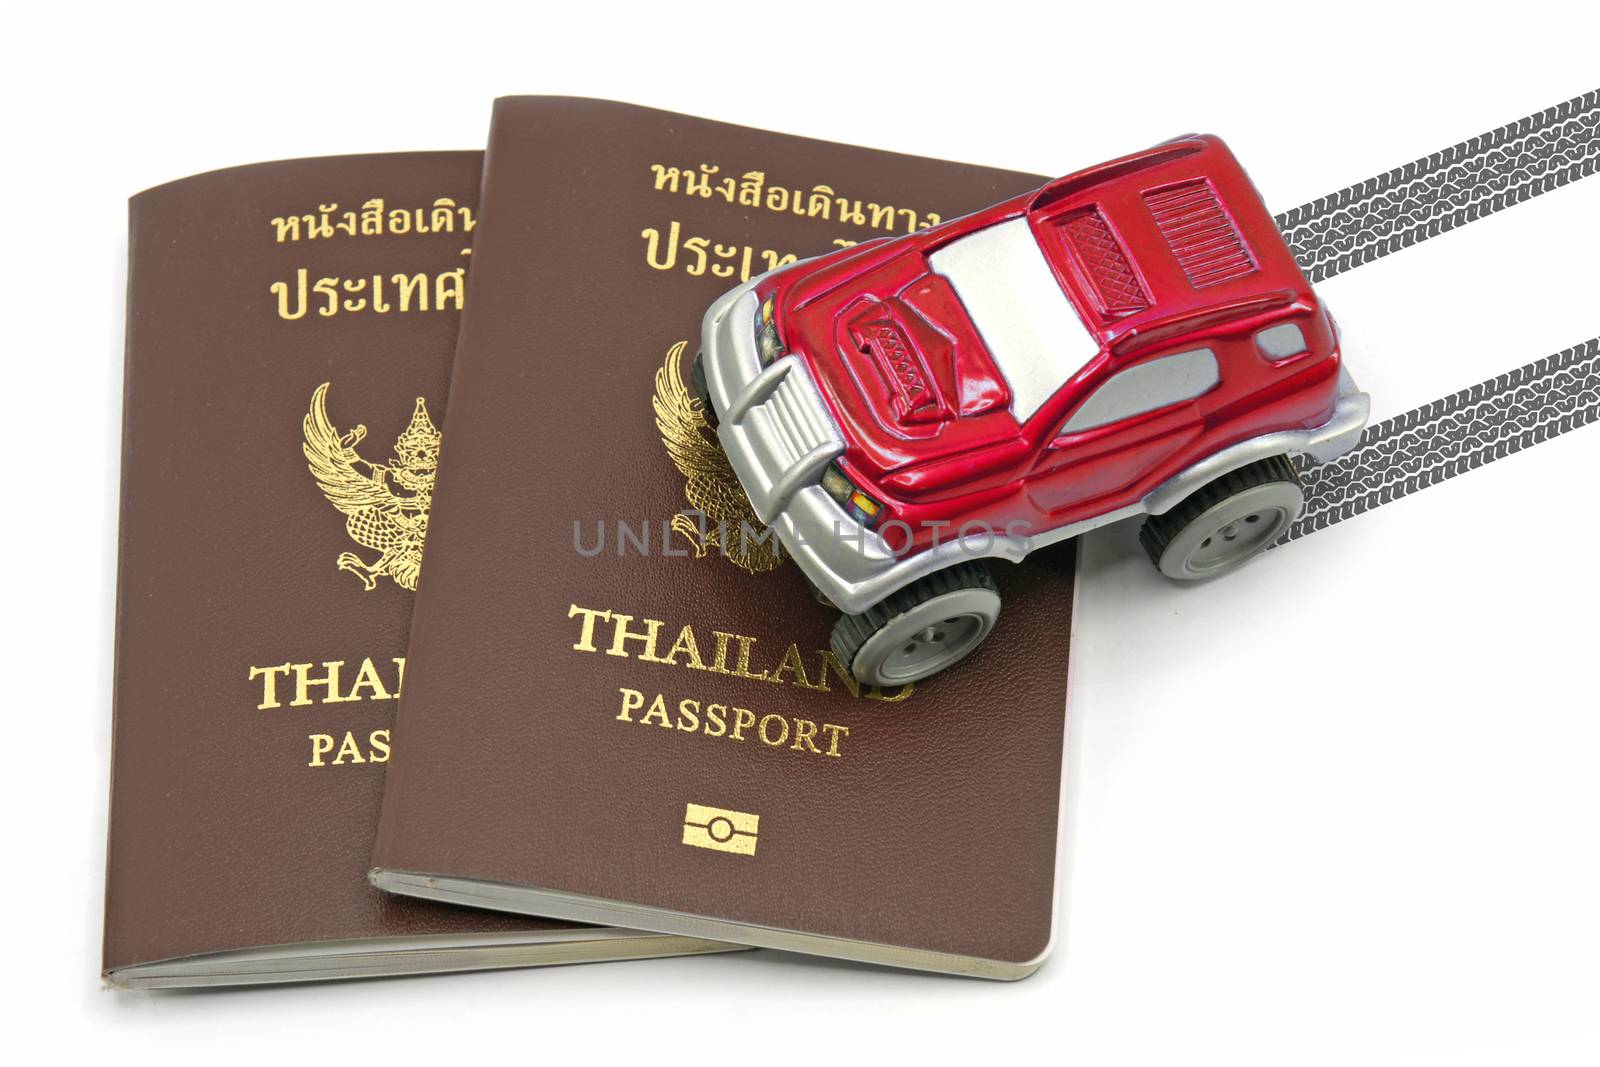 Thailand passport and red 4wd car for travel concept by mranucha